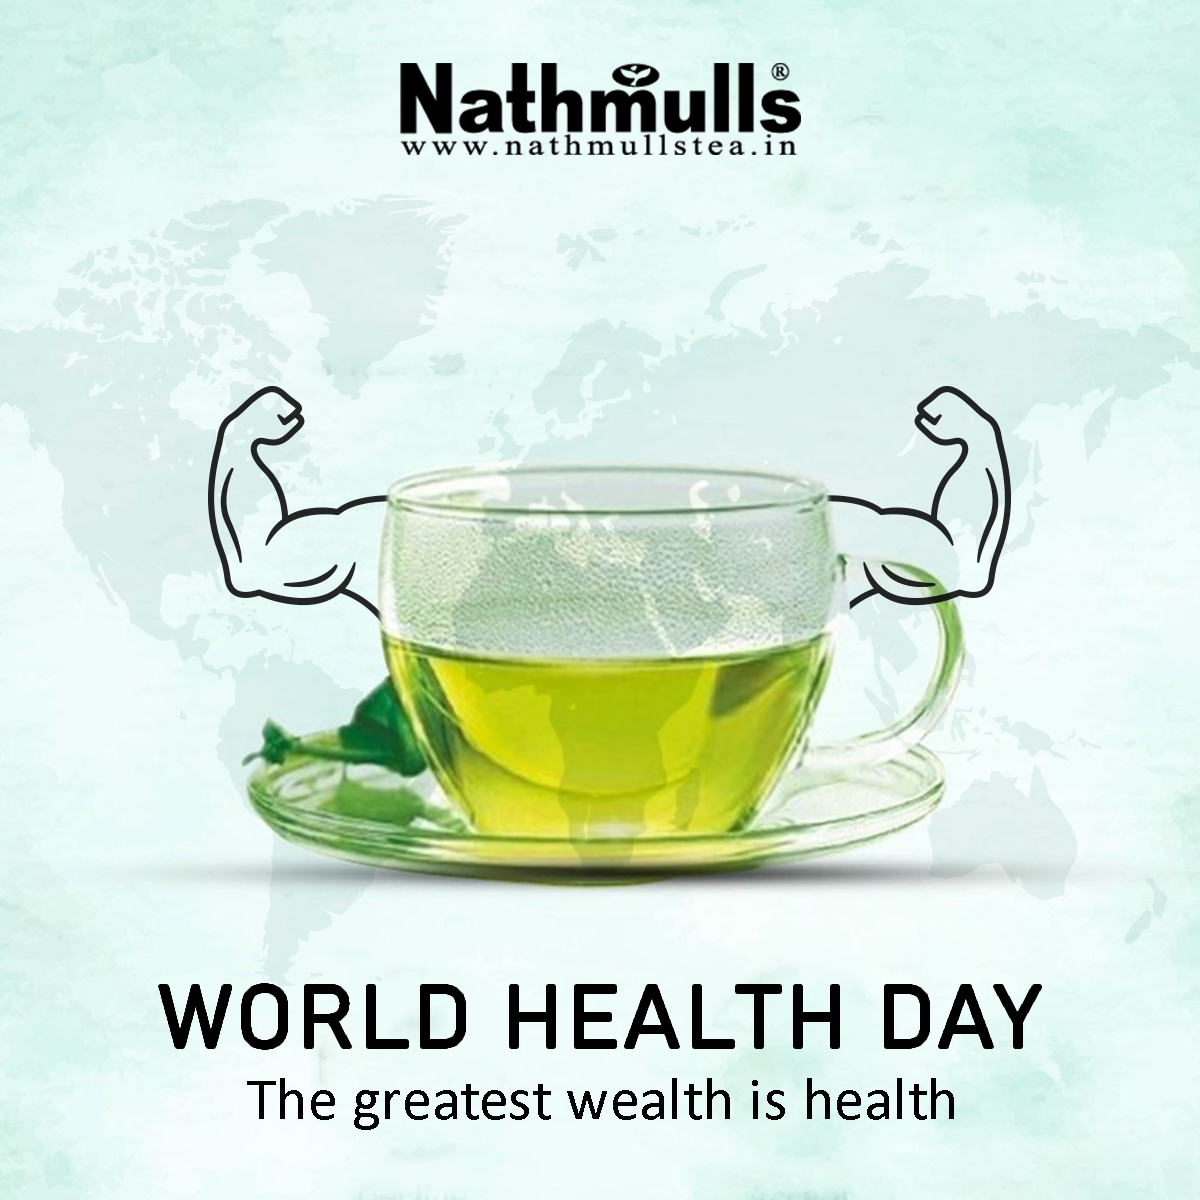 He who has Health has Hope, and he who has Hope has Everything'. Wishing you all Good Health in the coming years.💪 #health #worldhealthday #herbaltea #nathmulls #instaquote #motivational